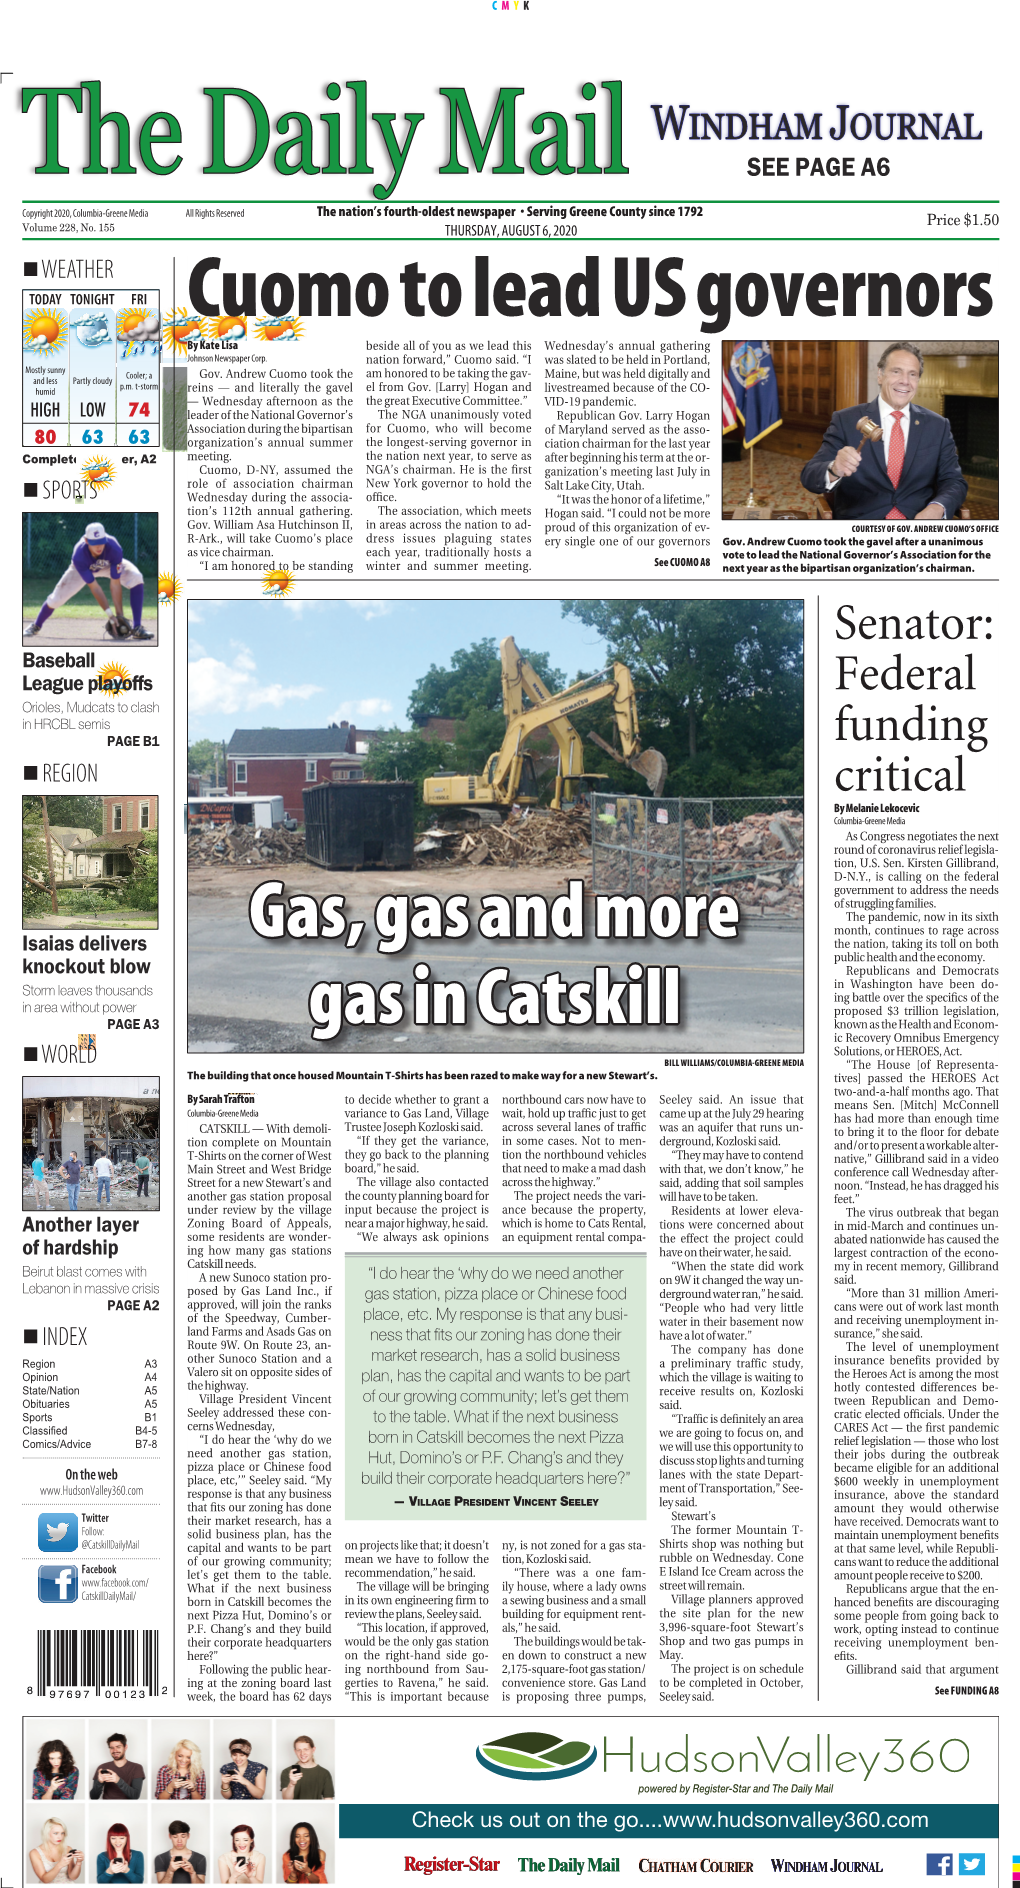 Gas, Gas and More Gas in Catskill